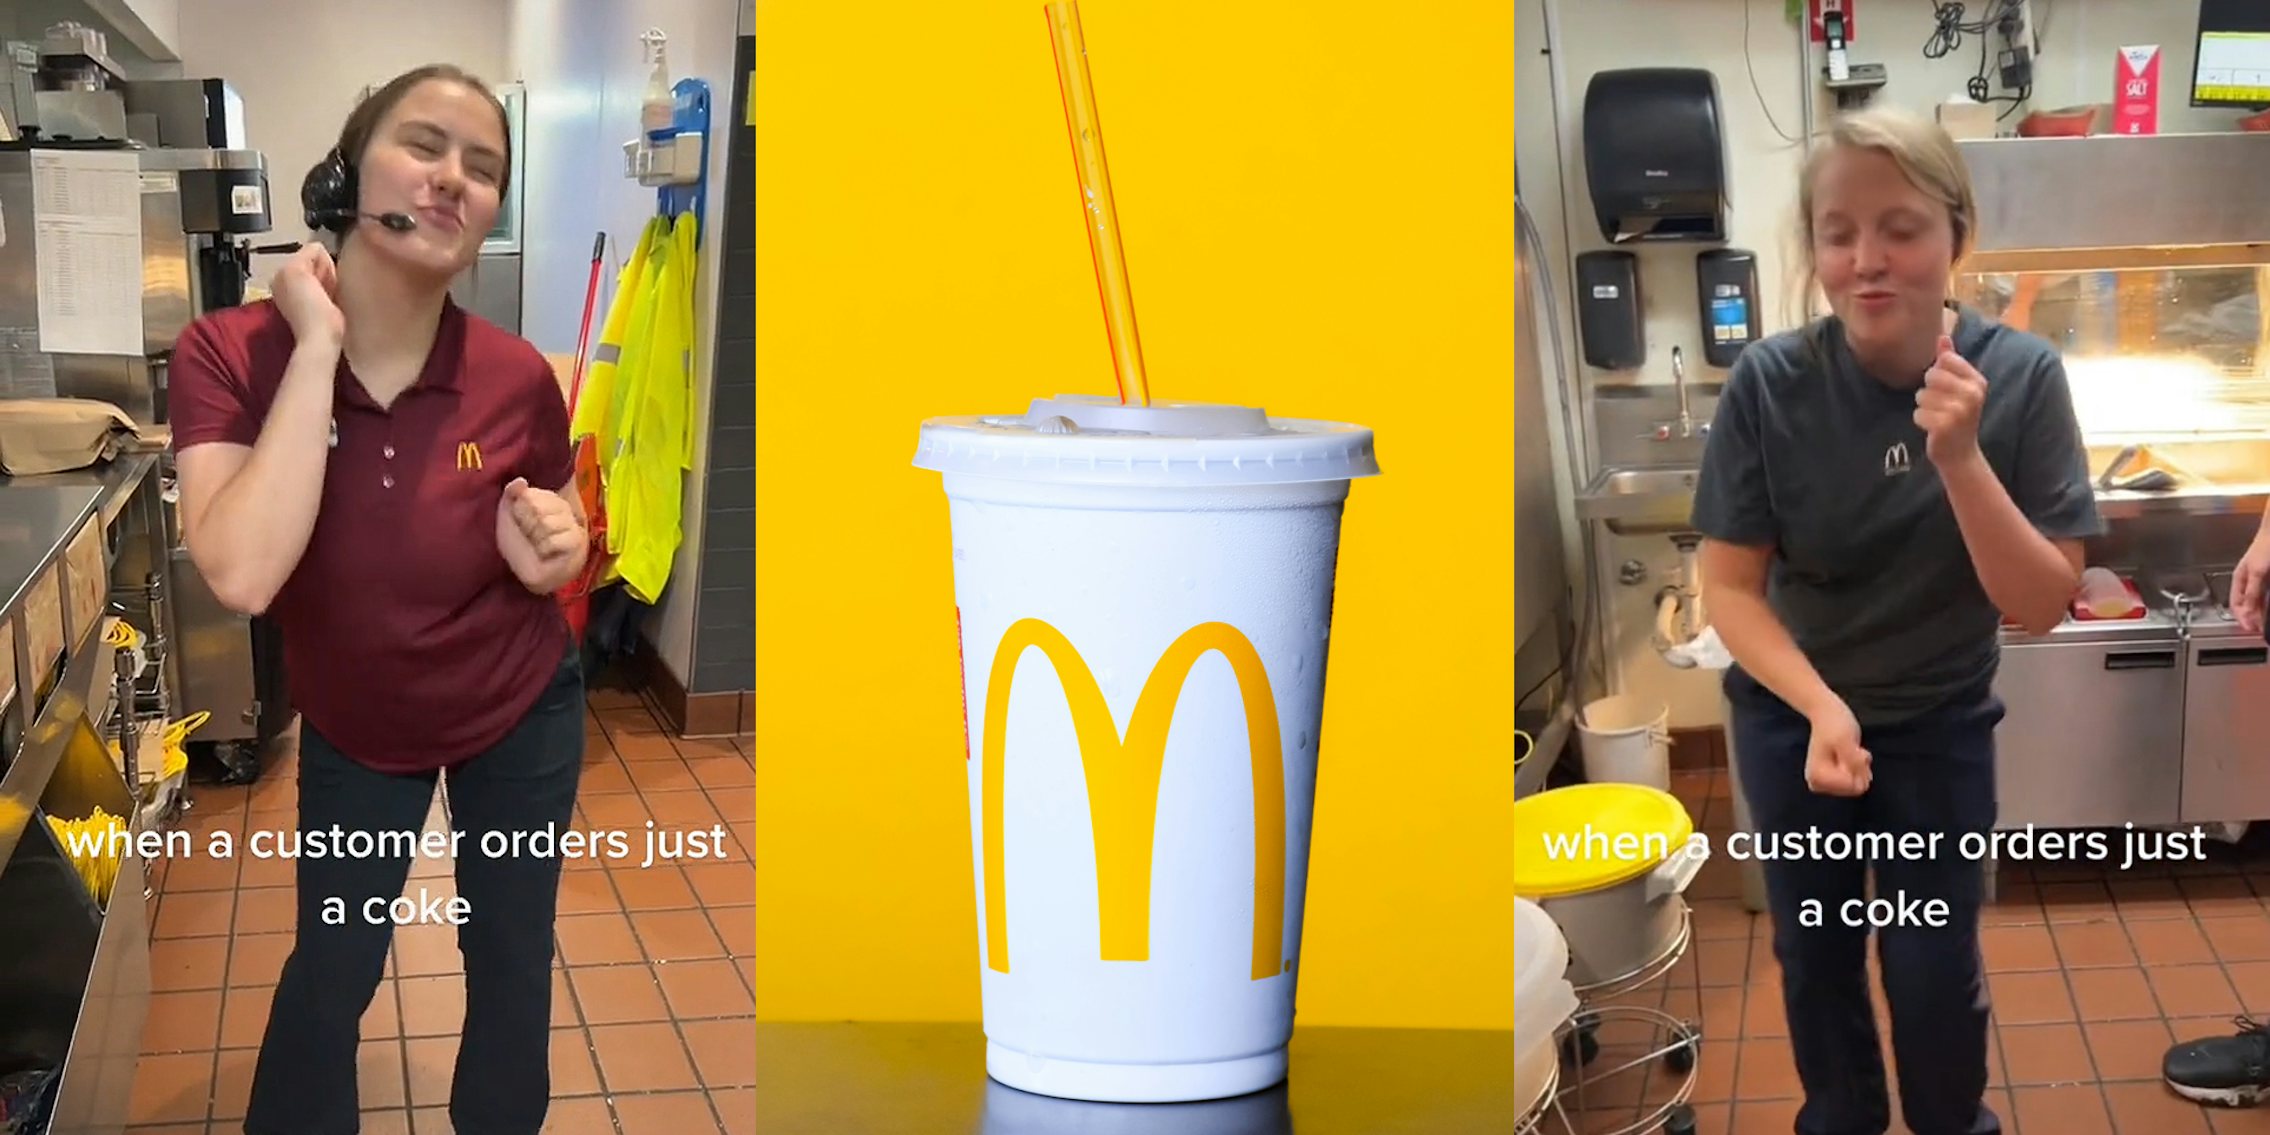 McDonald's worker dancing caption 'when a customer orders just a coke' (l) McDonald's drink on yellow background (c) McDonald's worker dancing caption 'when a customer orders just a coke' (r)